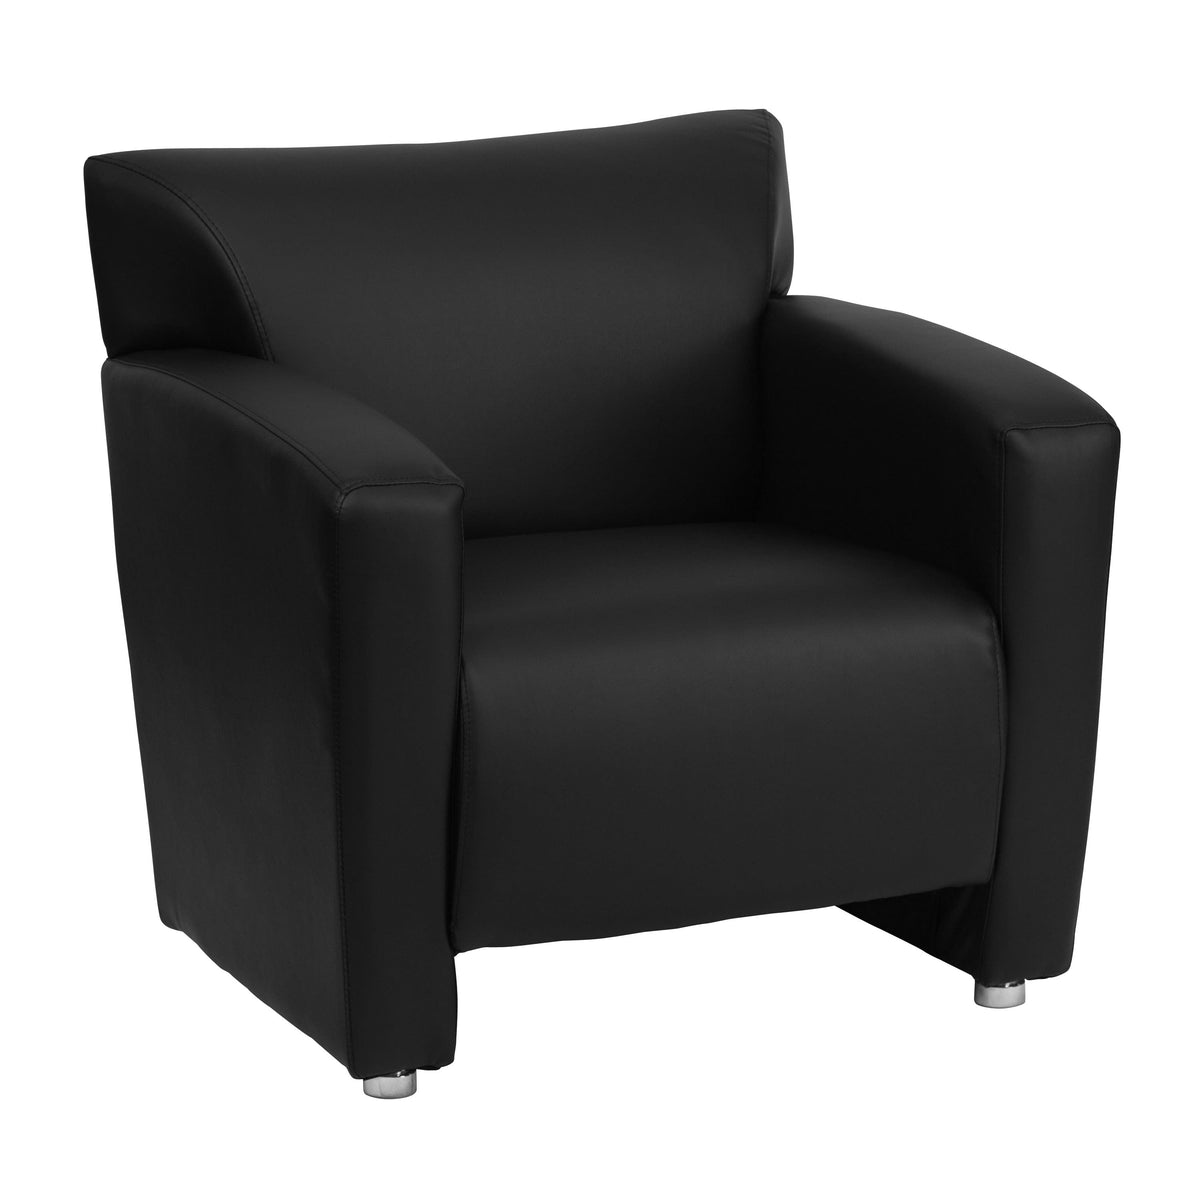 Black |#| Reception Set with Extended Panel Arms - Hospitality or Lounge Seating